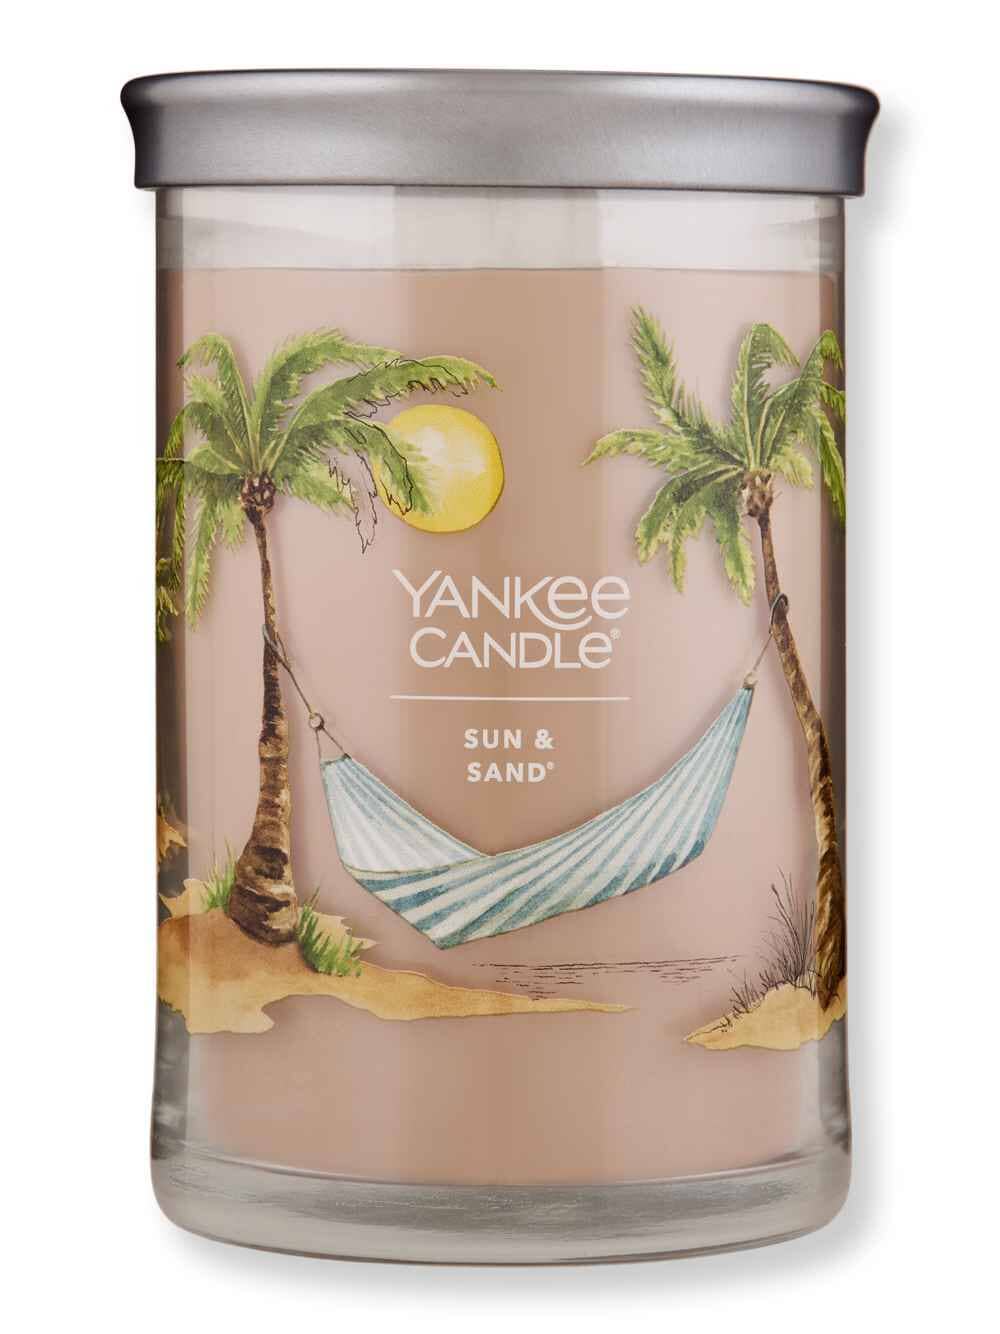 Yankee Candle Yankee Candle Sun & Sand Signature Large 2-Wick Tumbler Candle 20 oz Candles & Diffusers 